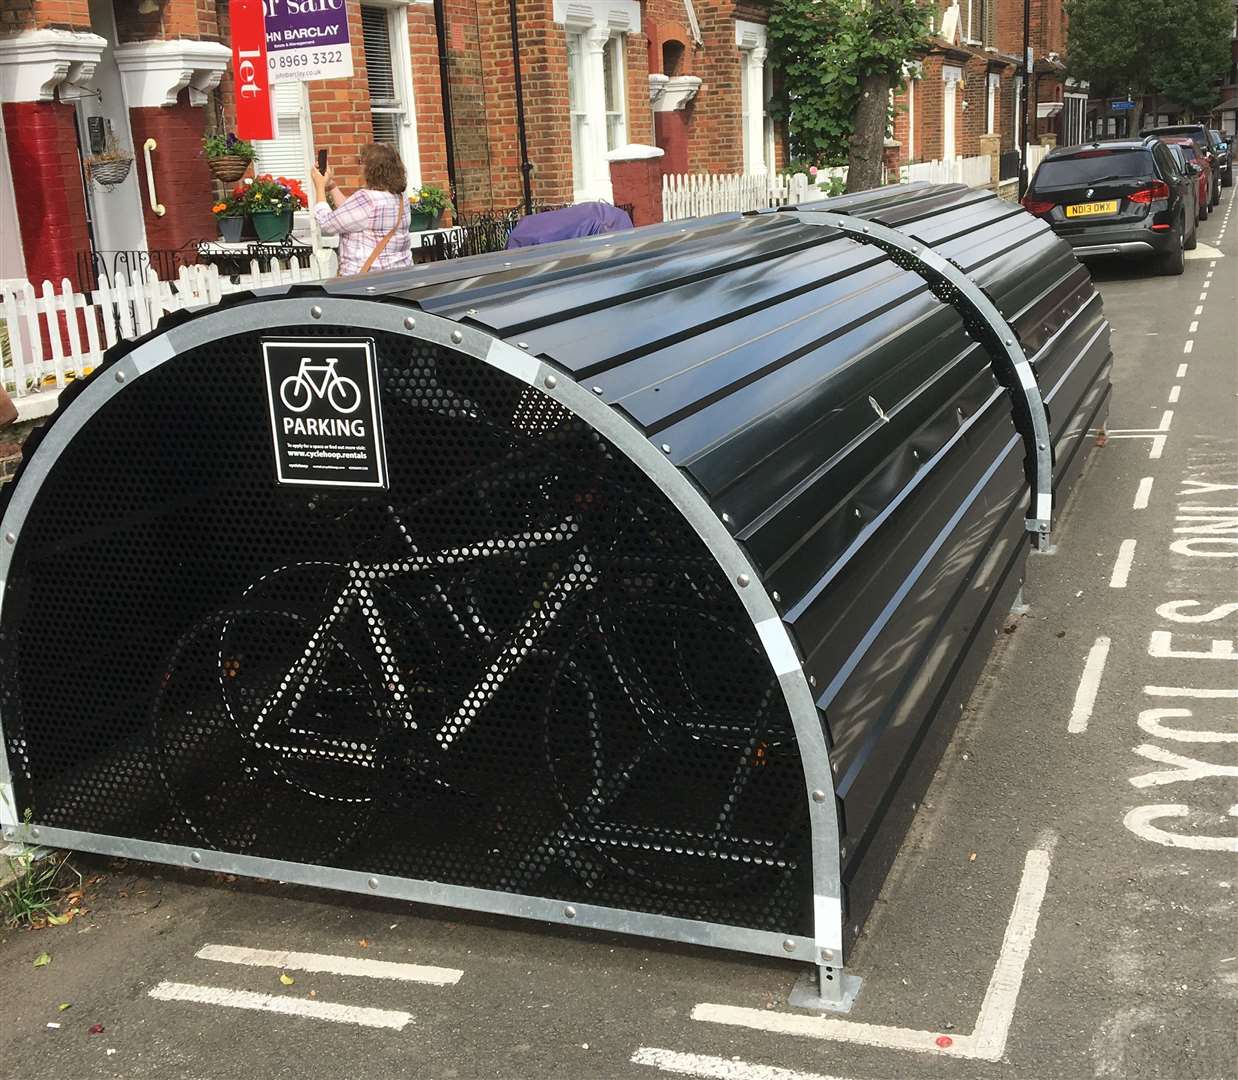 A bike hangar scheme in London, similar to the one proposed in Faversham. Picture: Louise Bareham